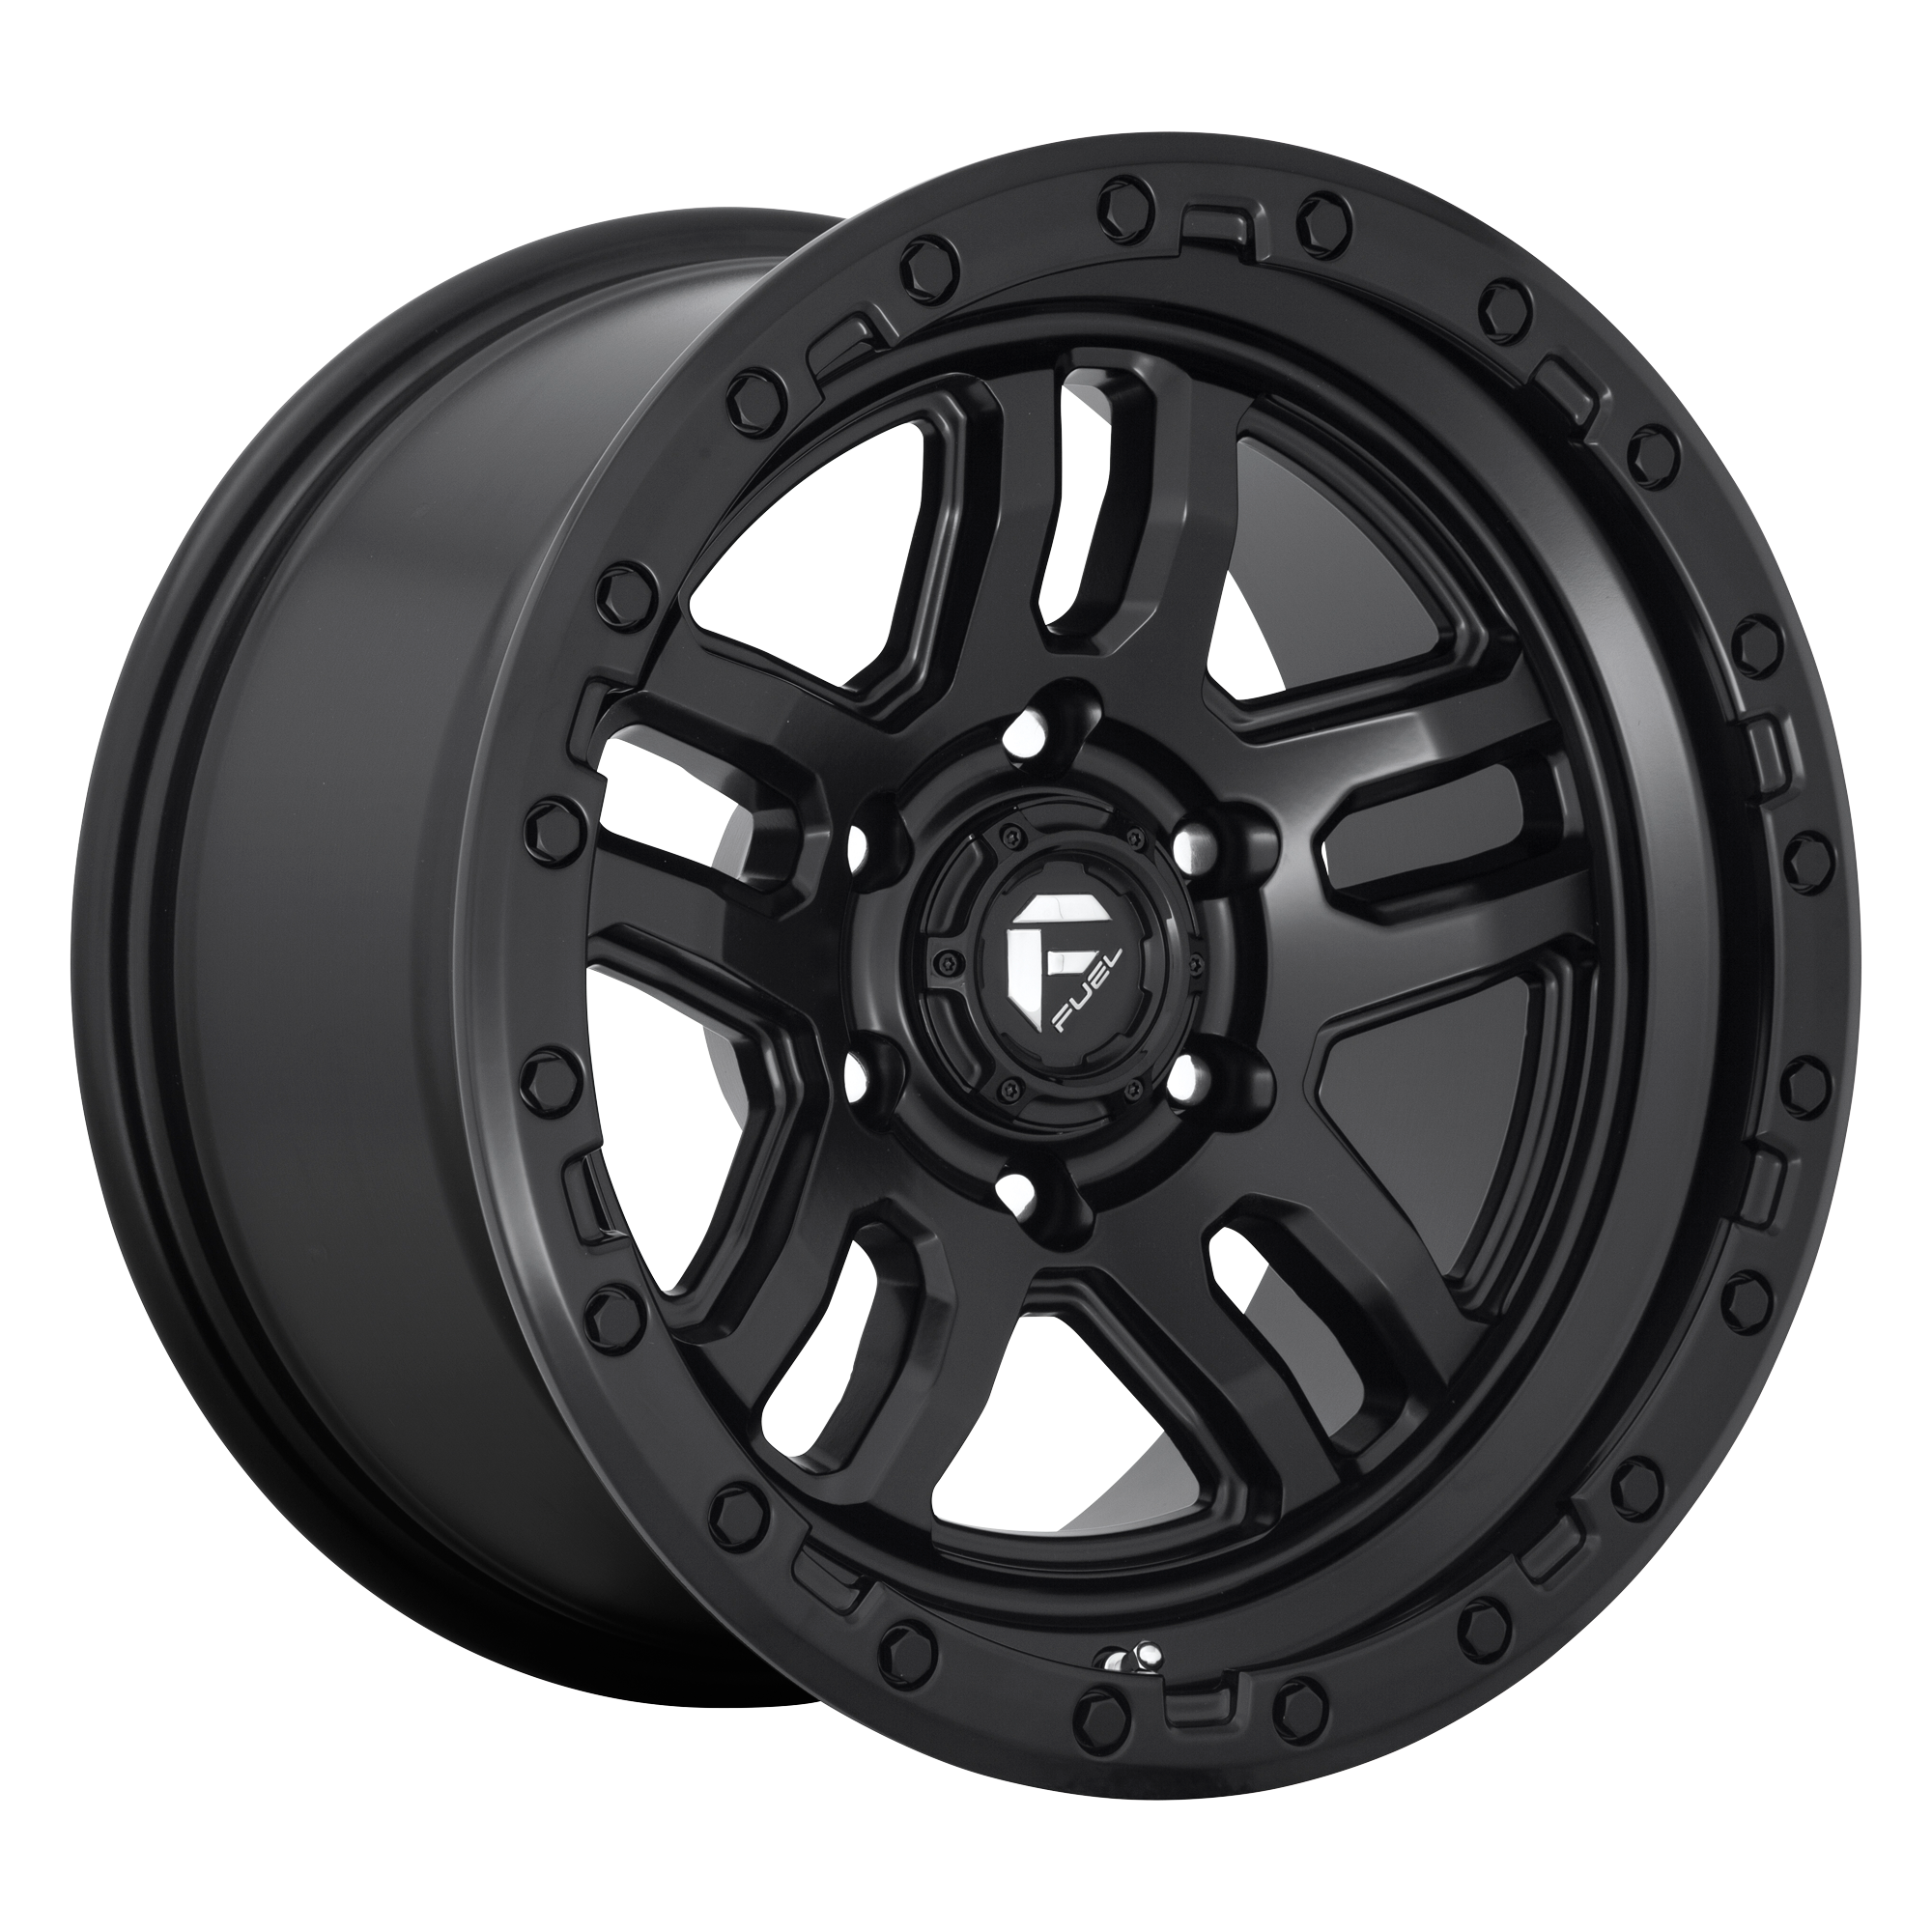 AMMO 17x9 5x127.00 MATTE BLACK (1 mm) - Tires and Engine Performance